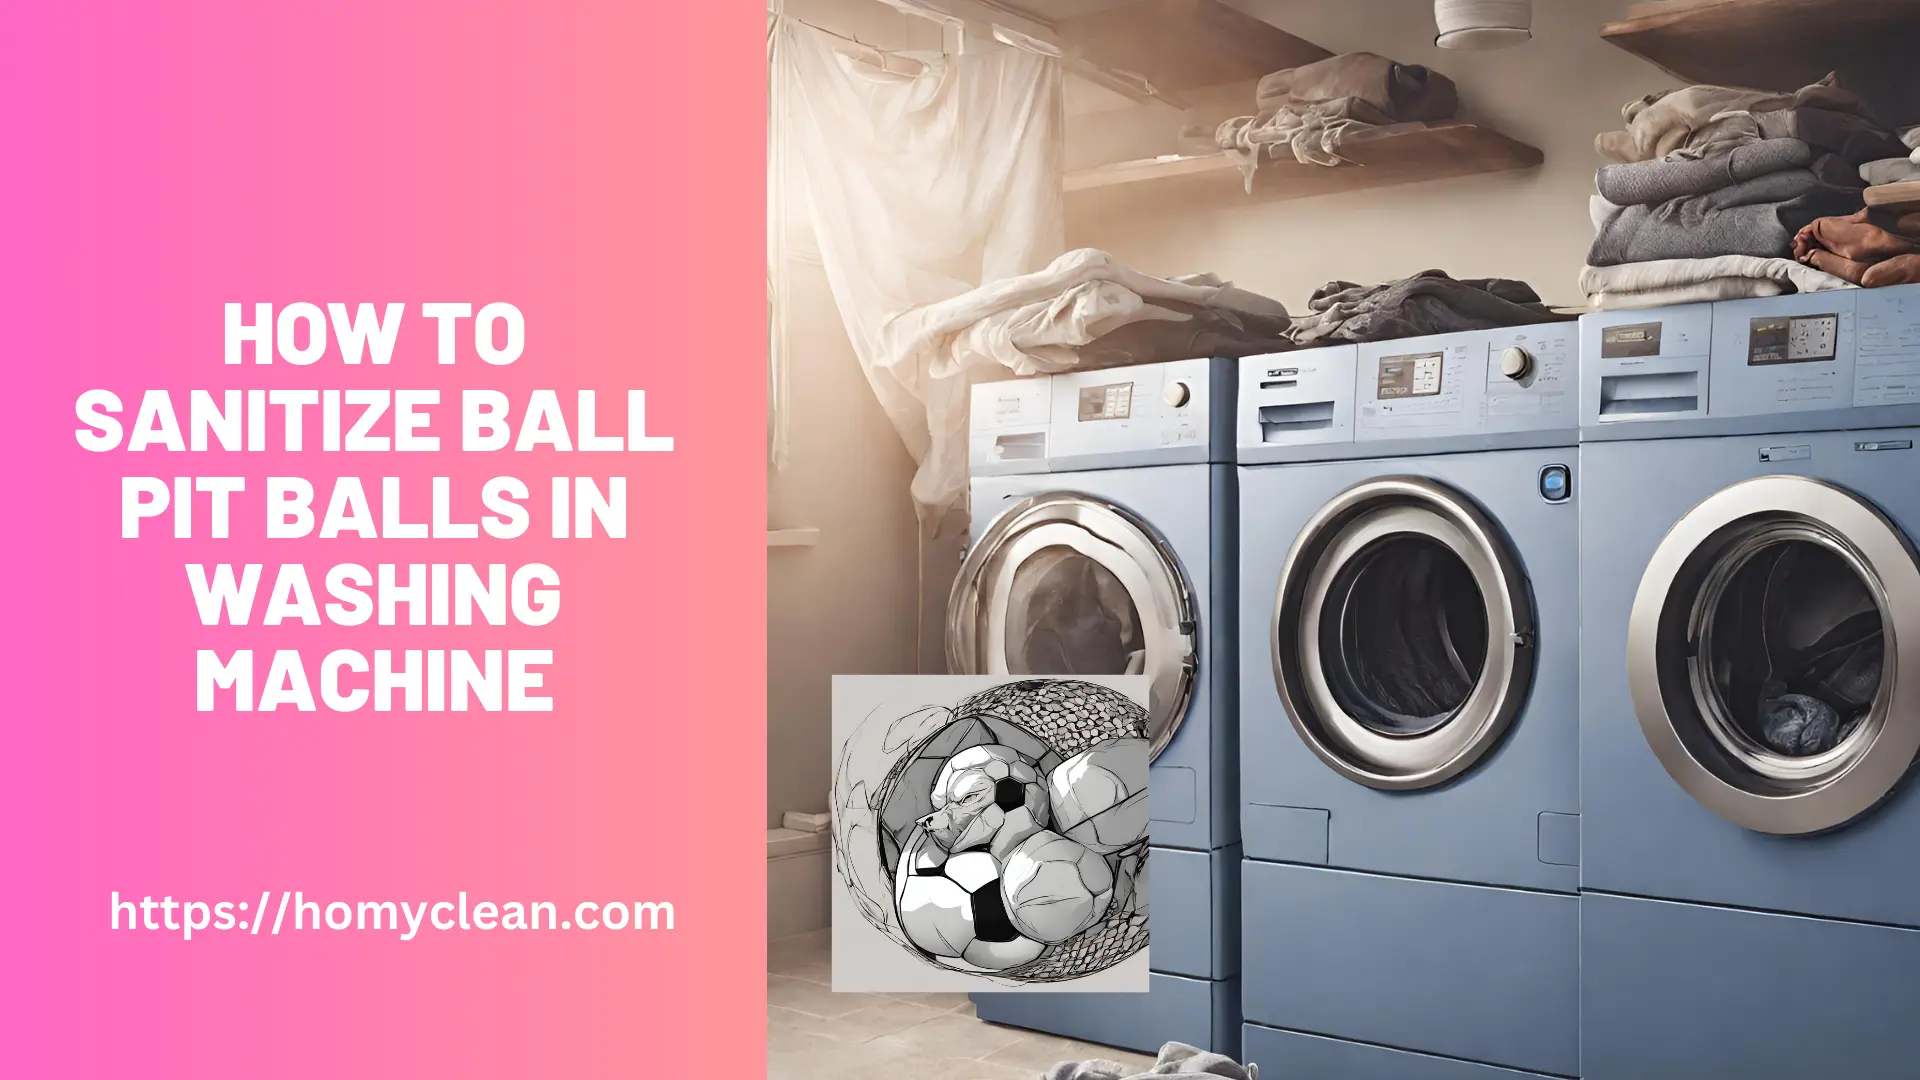 How to Sanitize Ball Pit Balls in Washing Machine